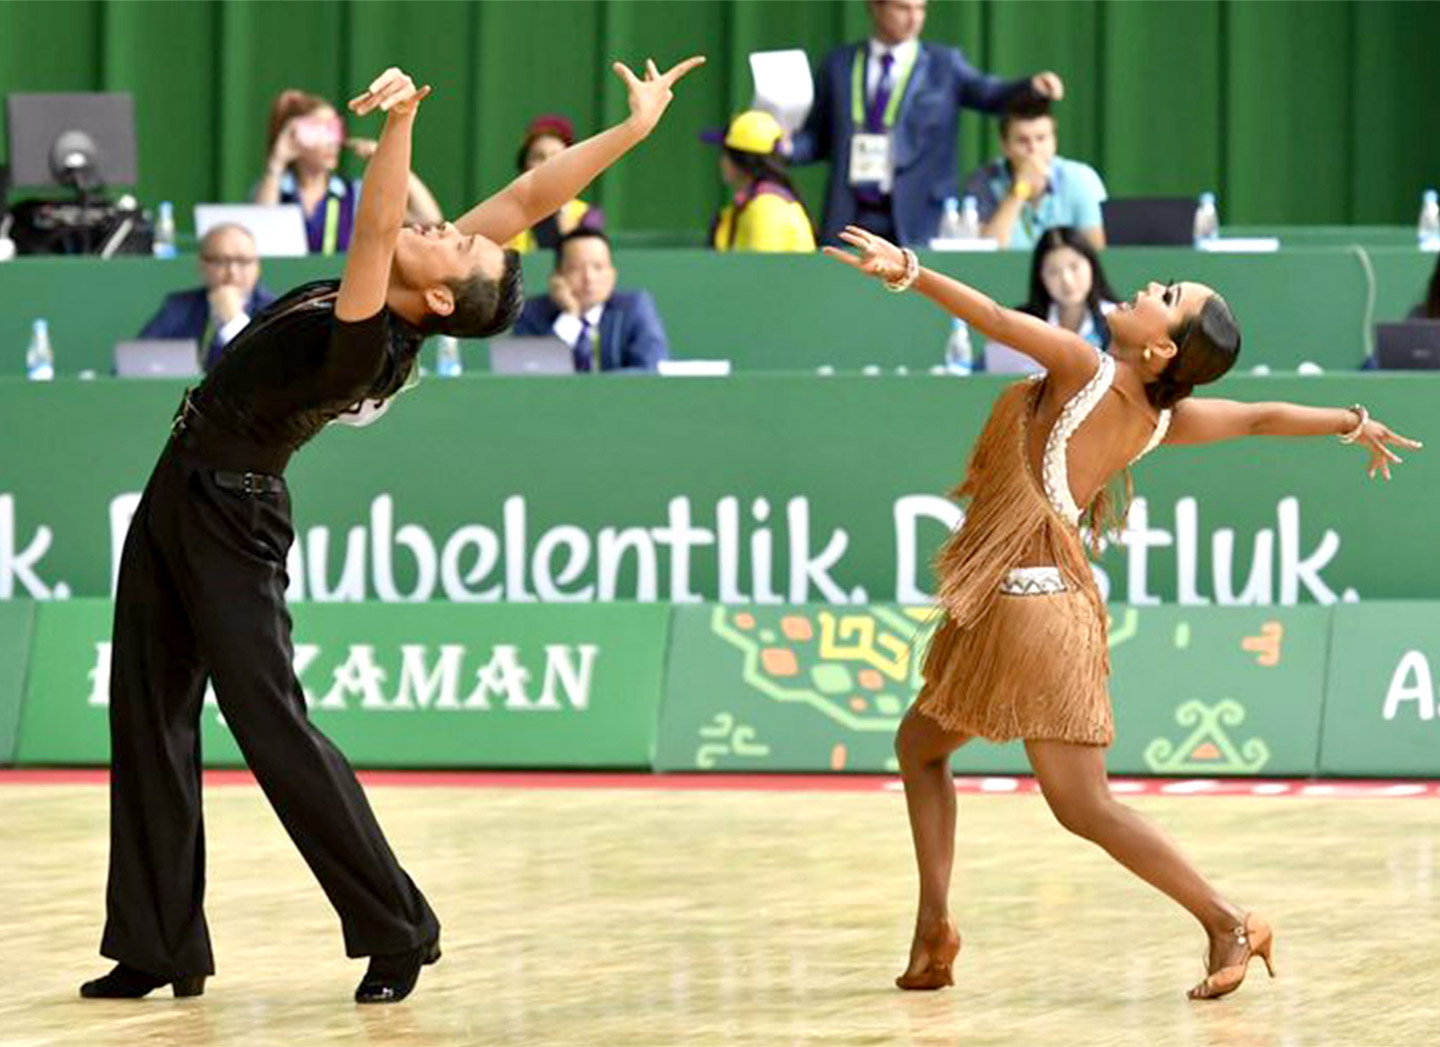 Sam and Michelle won a silver medal in dancesport of the 2017 Asian Indoor and Martial Arts Games <em>(courtesy of the Sports Federation & Olympic Committee of Hong Kong)</em>